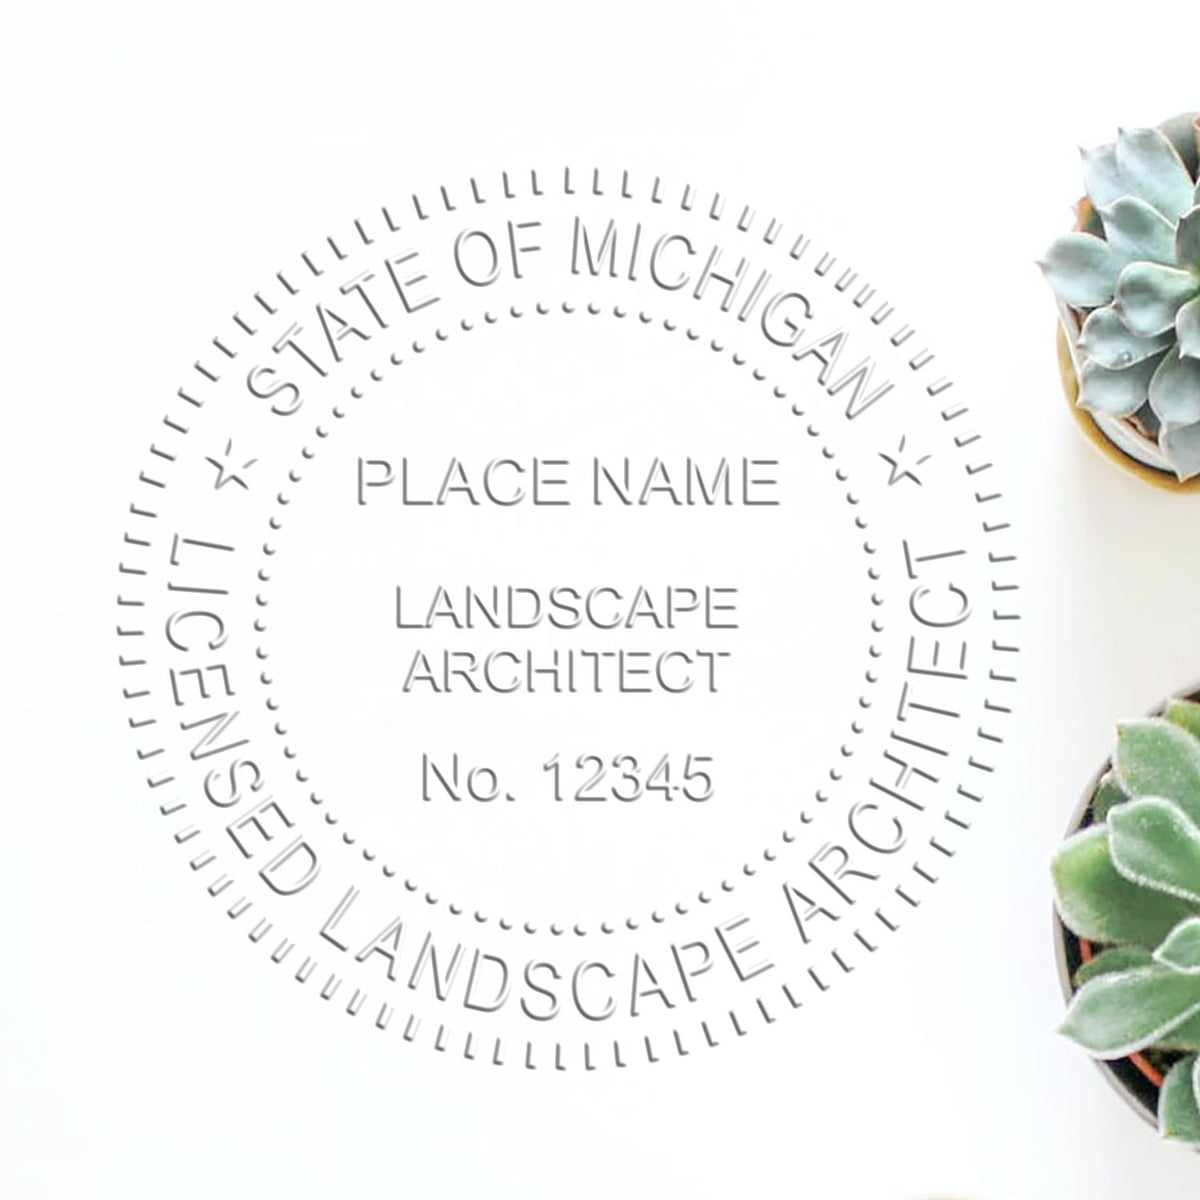 The Gift Michigan Landscape Architect Seal stamp impression comes to life with a crisp, detailed image stamped on paper - showcasing true professional quality.